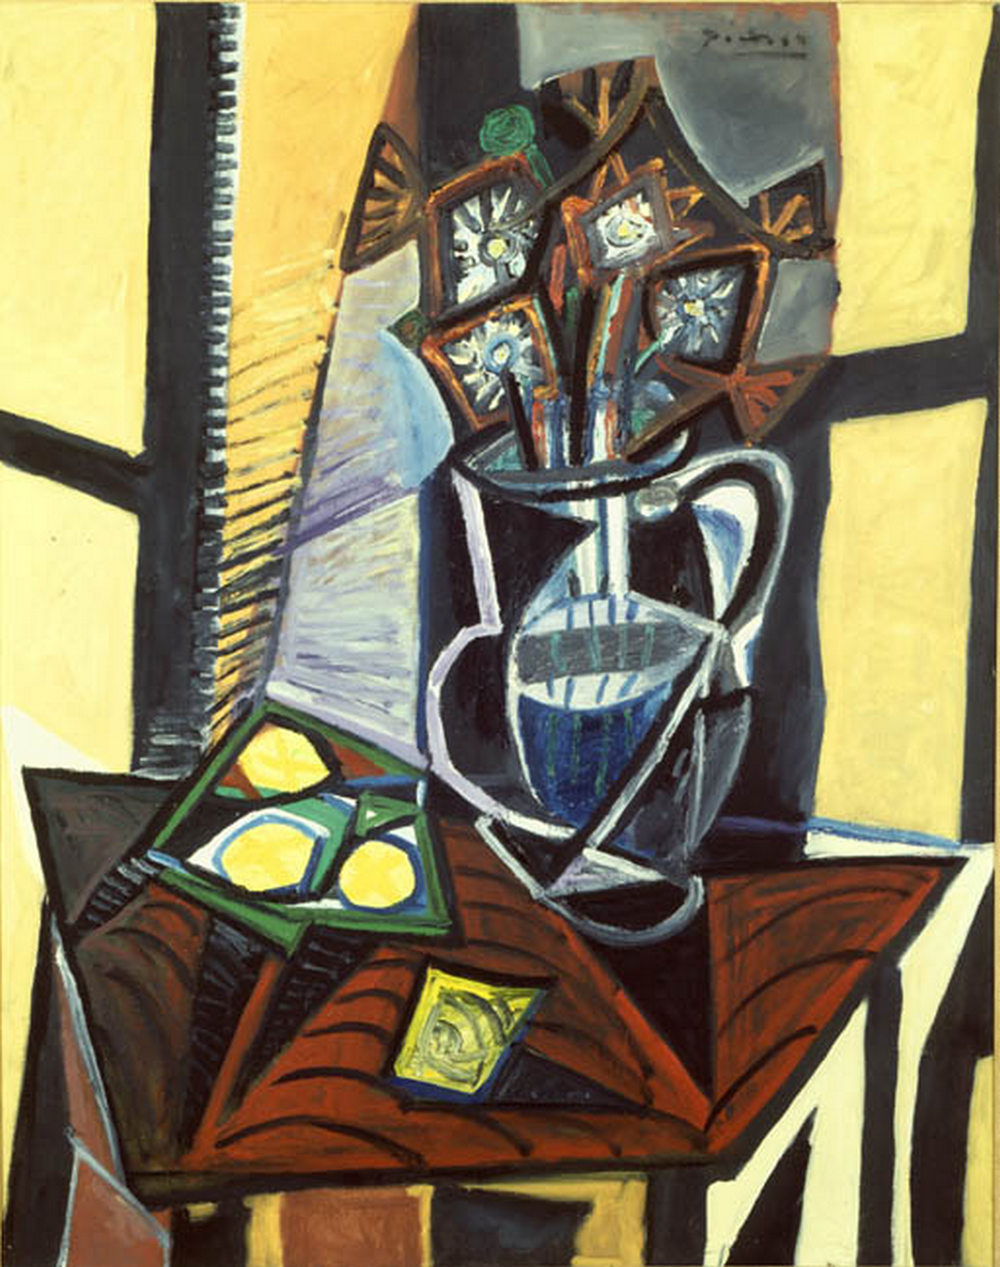 Pablo Picasso's painting - Still Life with Flowers and Lemons